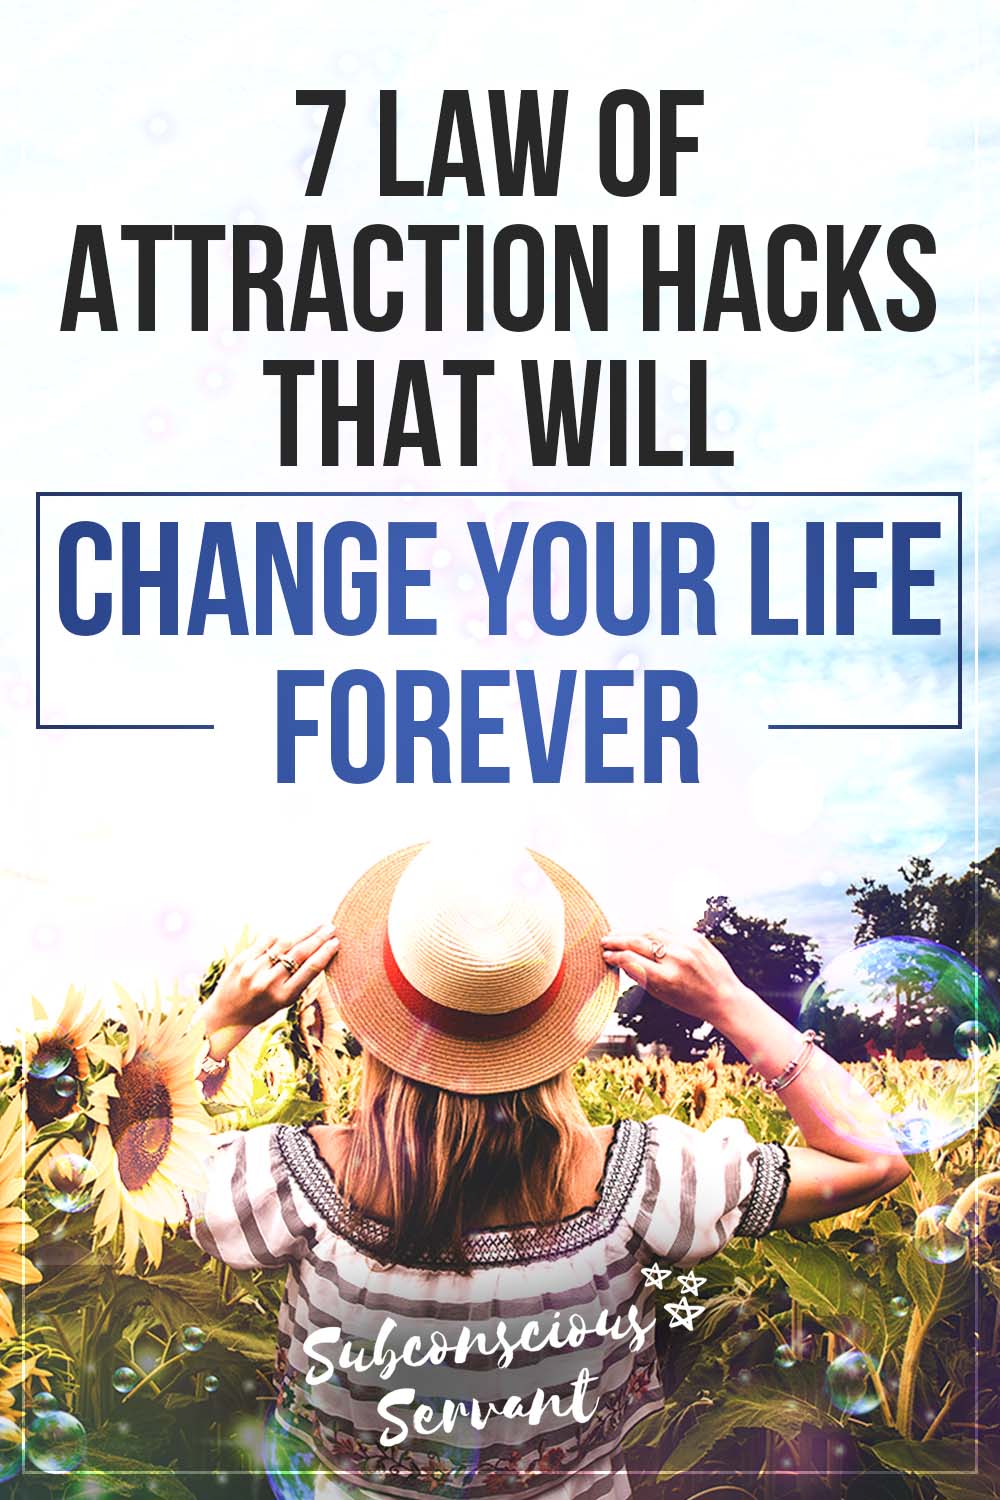 7 Law Of Attraction Hacks That Will Change Your Life Forever